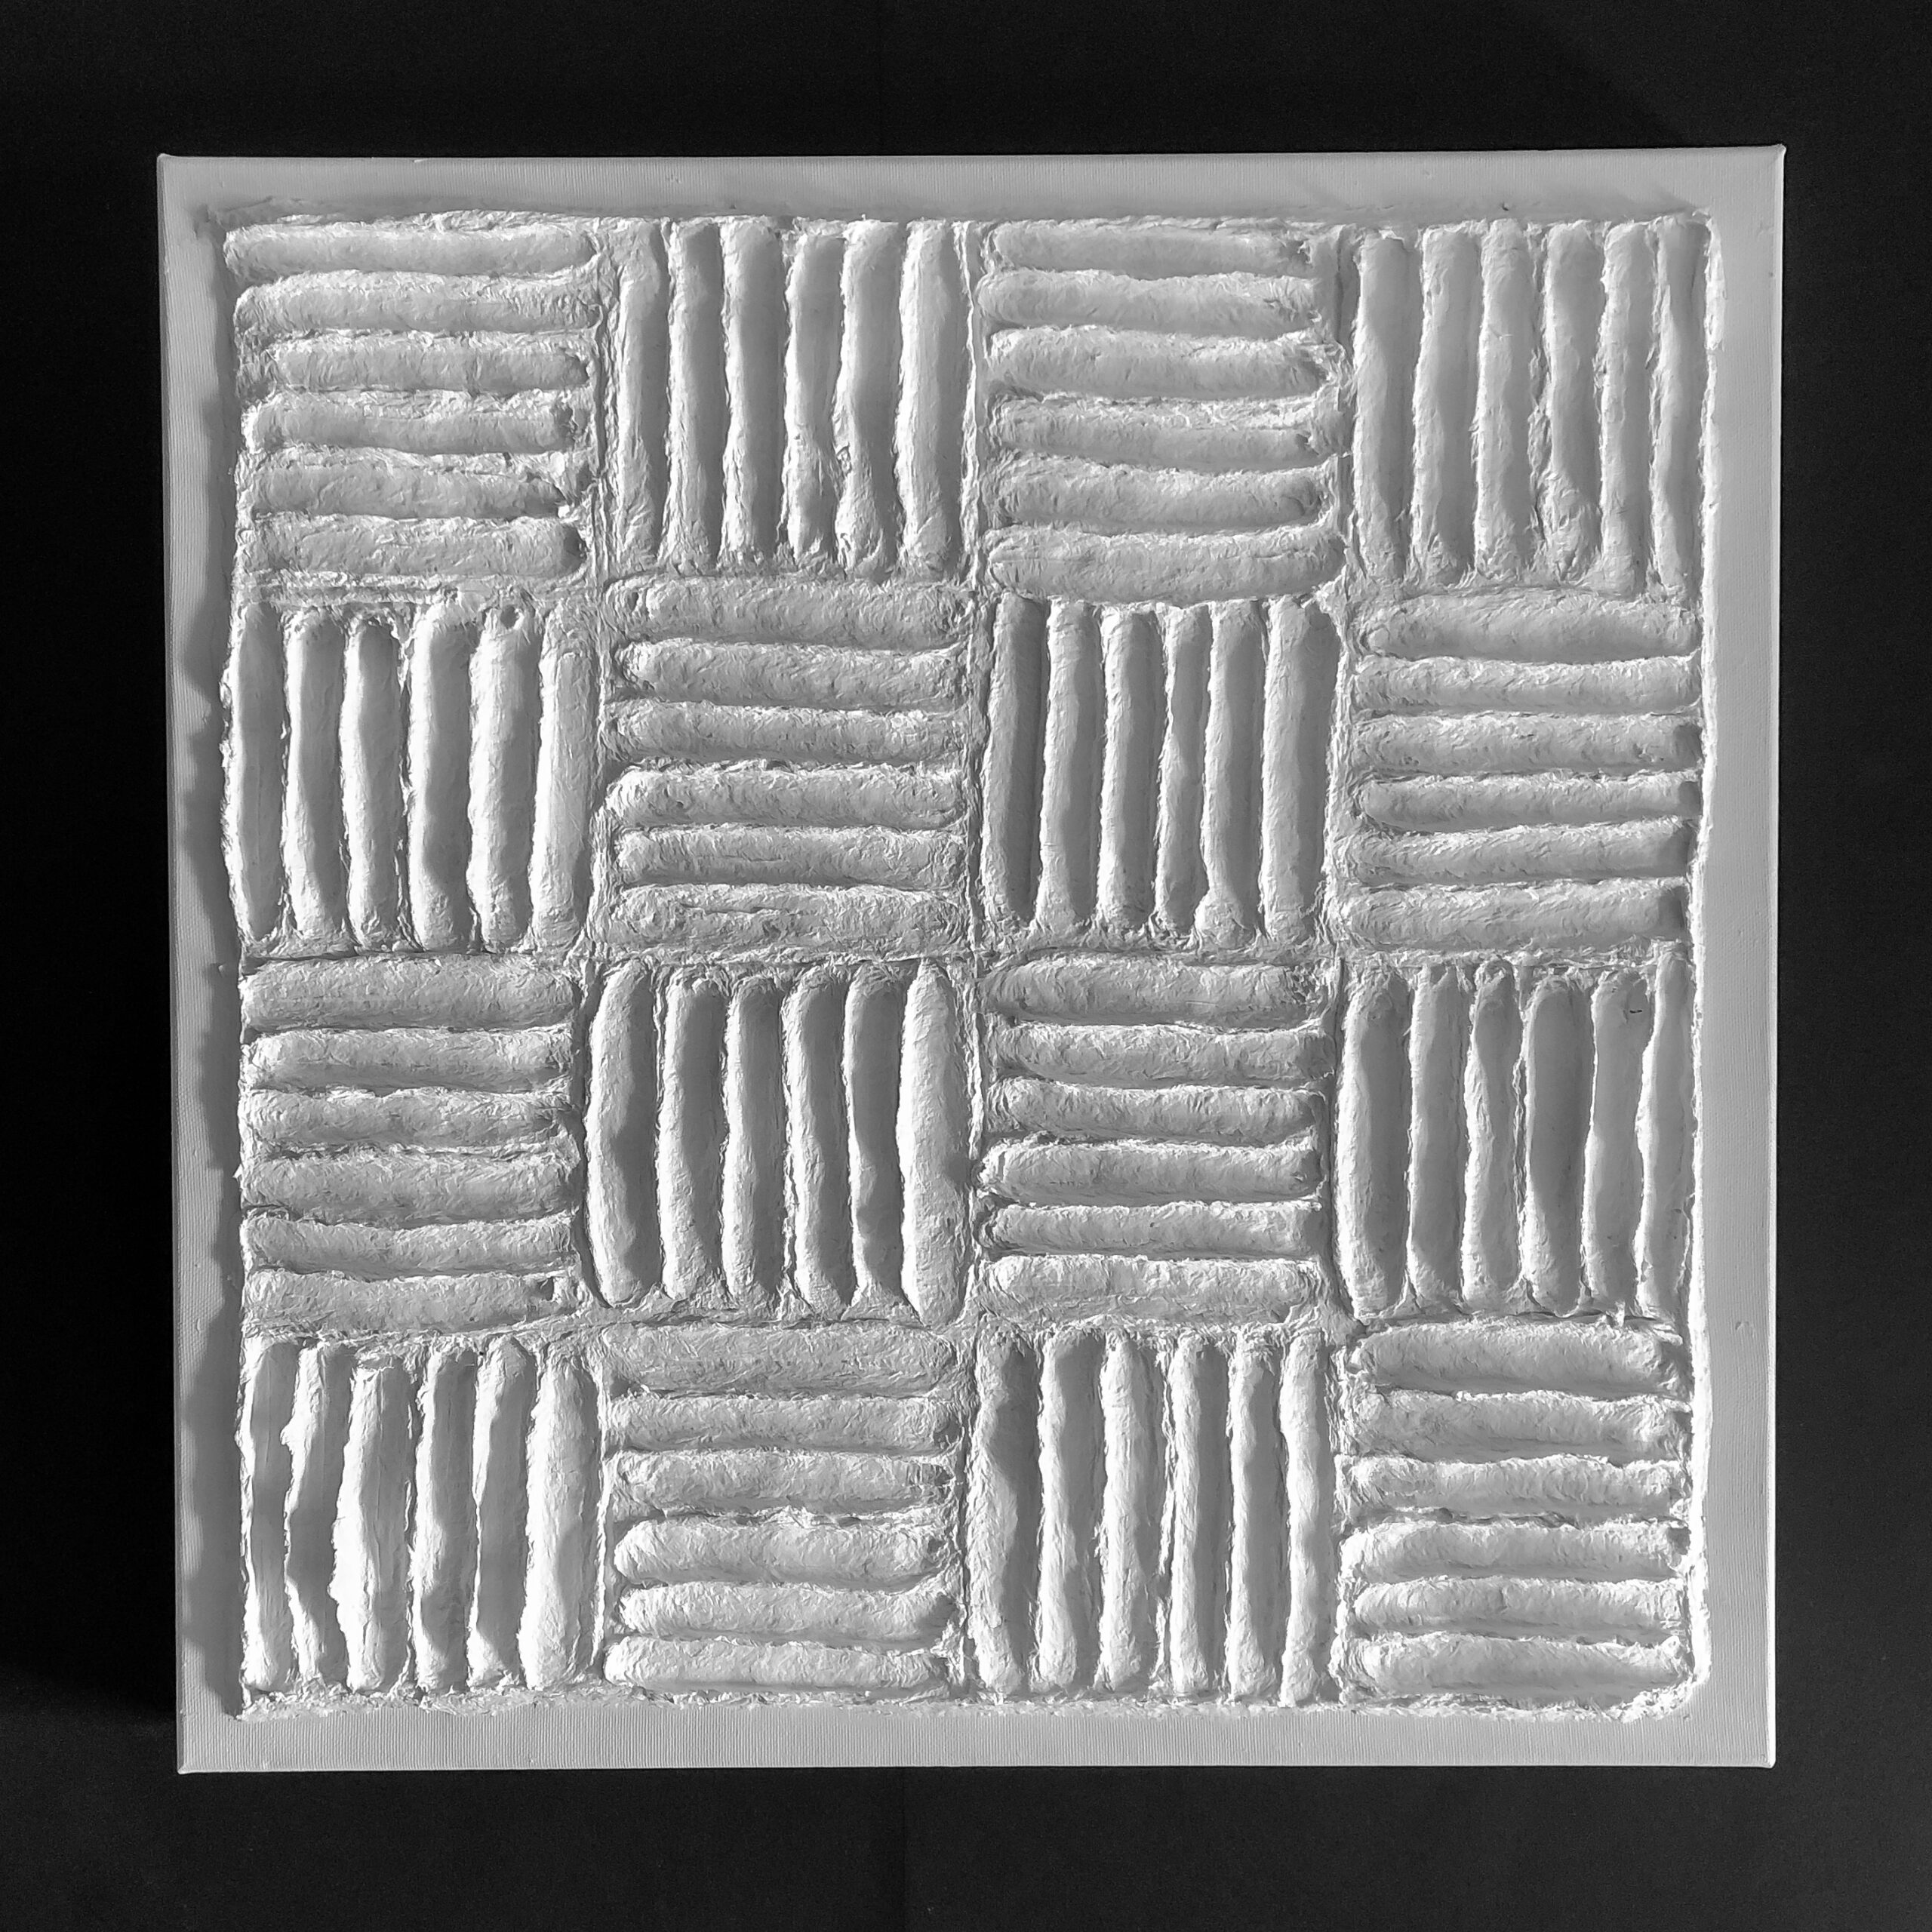 Forwart Jan Schoonhoven Jr White square 2020 - white paper mache on canvas painted with acrylic and pigment 50x50 cm